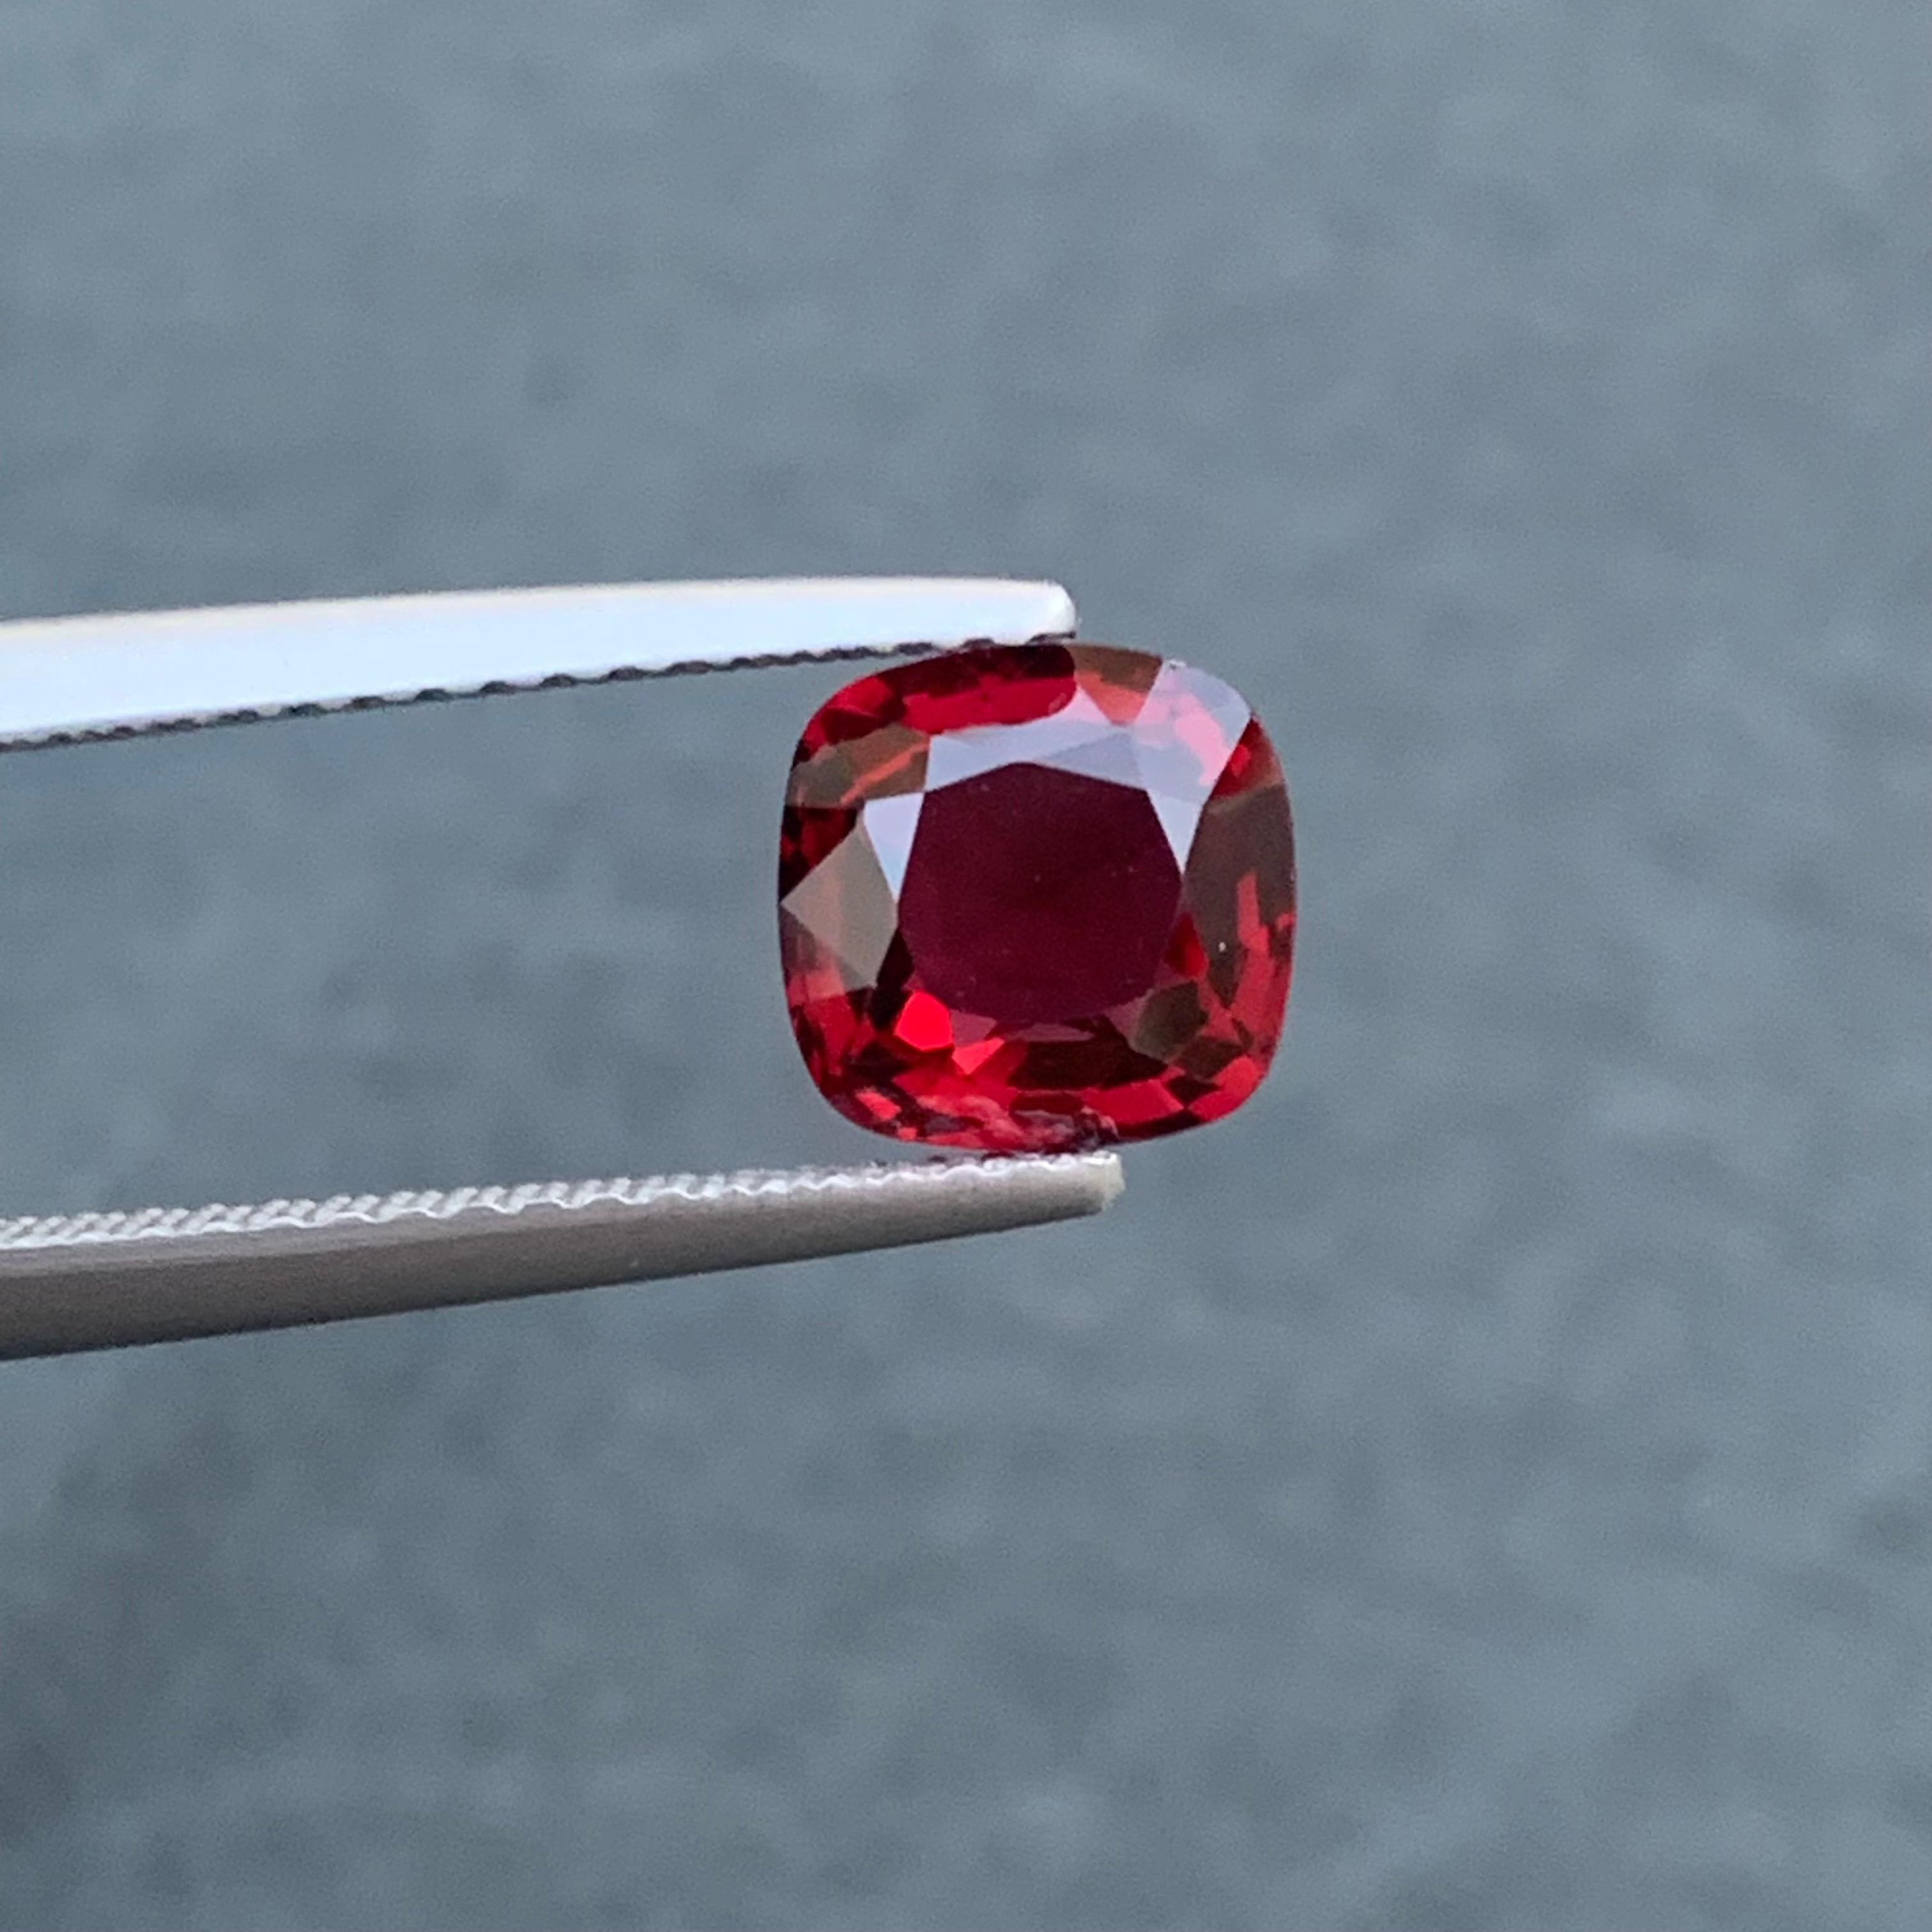 Baroque Stunning 1.60 Carat Natural Loose Red Spinel from Myanmar Burma Cushion Shape